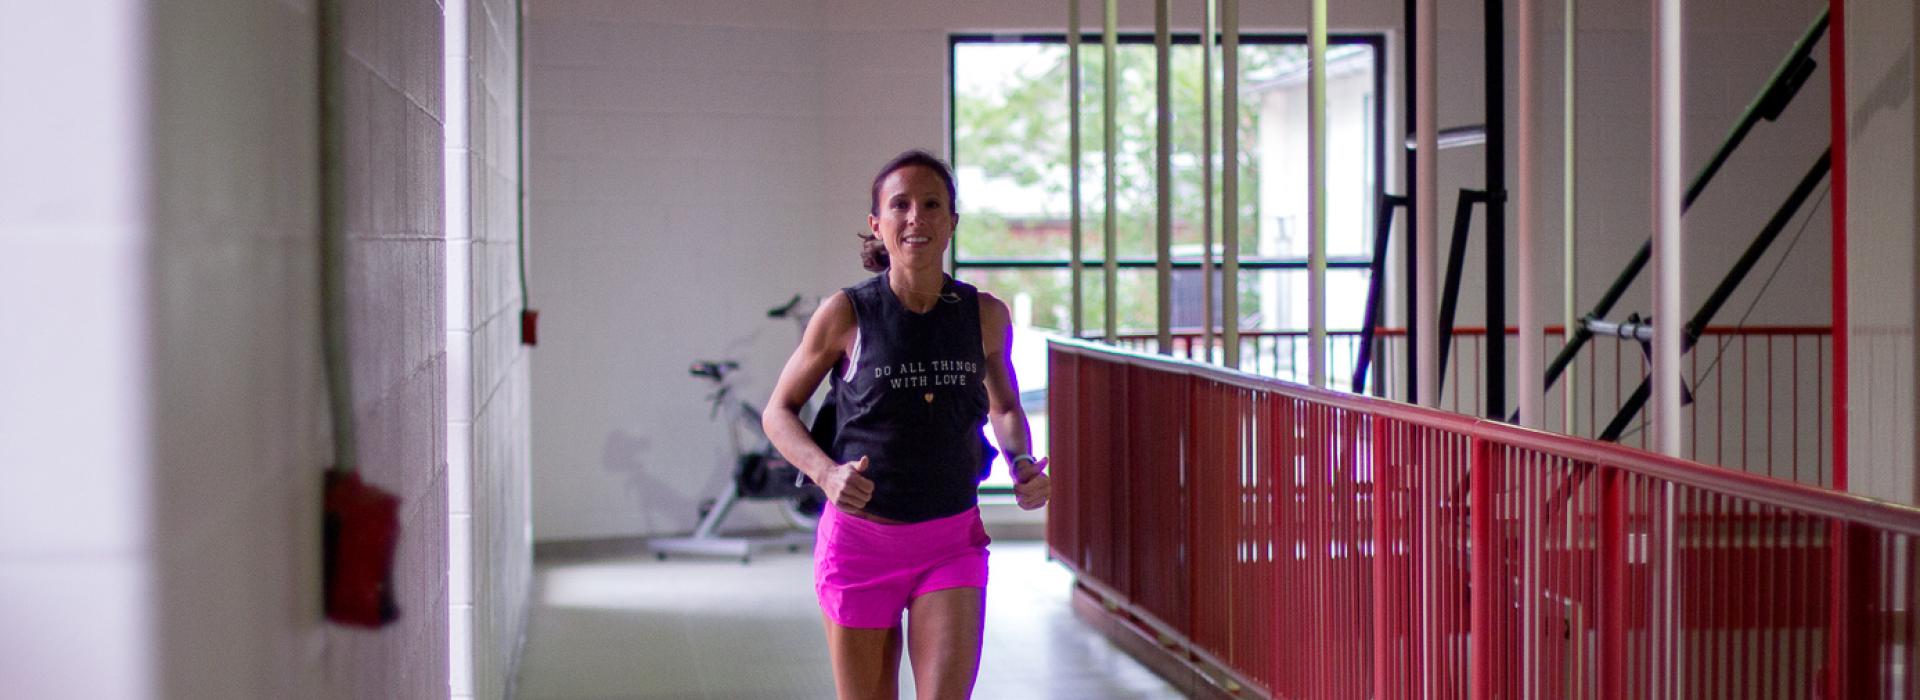 Love to go running? Our personal trainers are here to help you with your running goals at the YMCA.